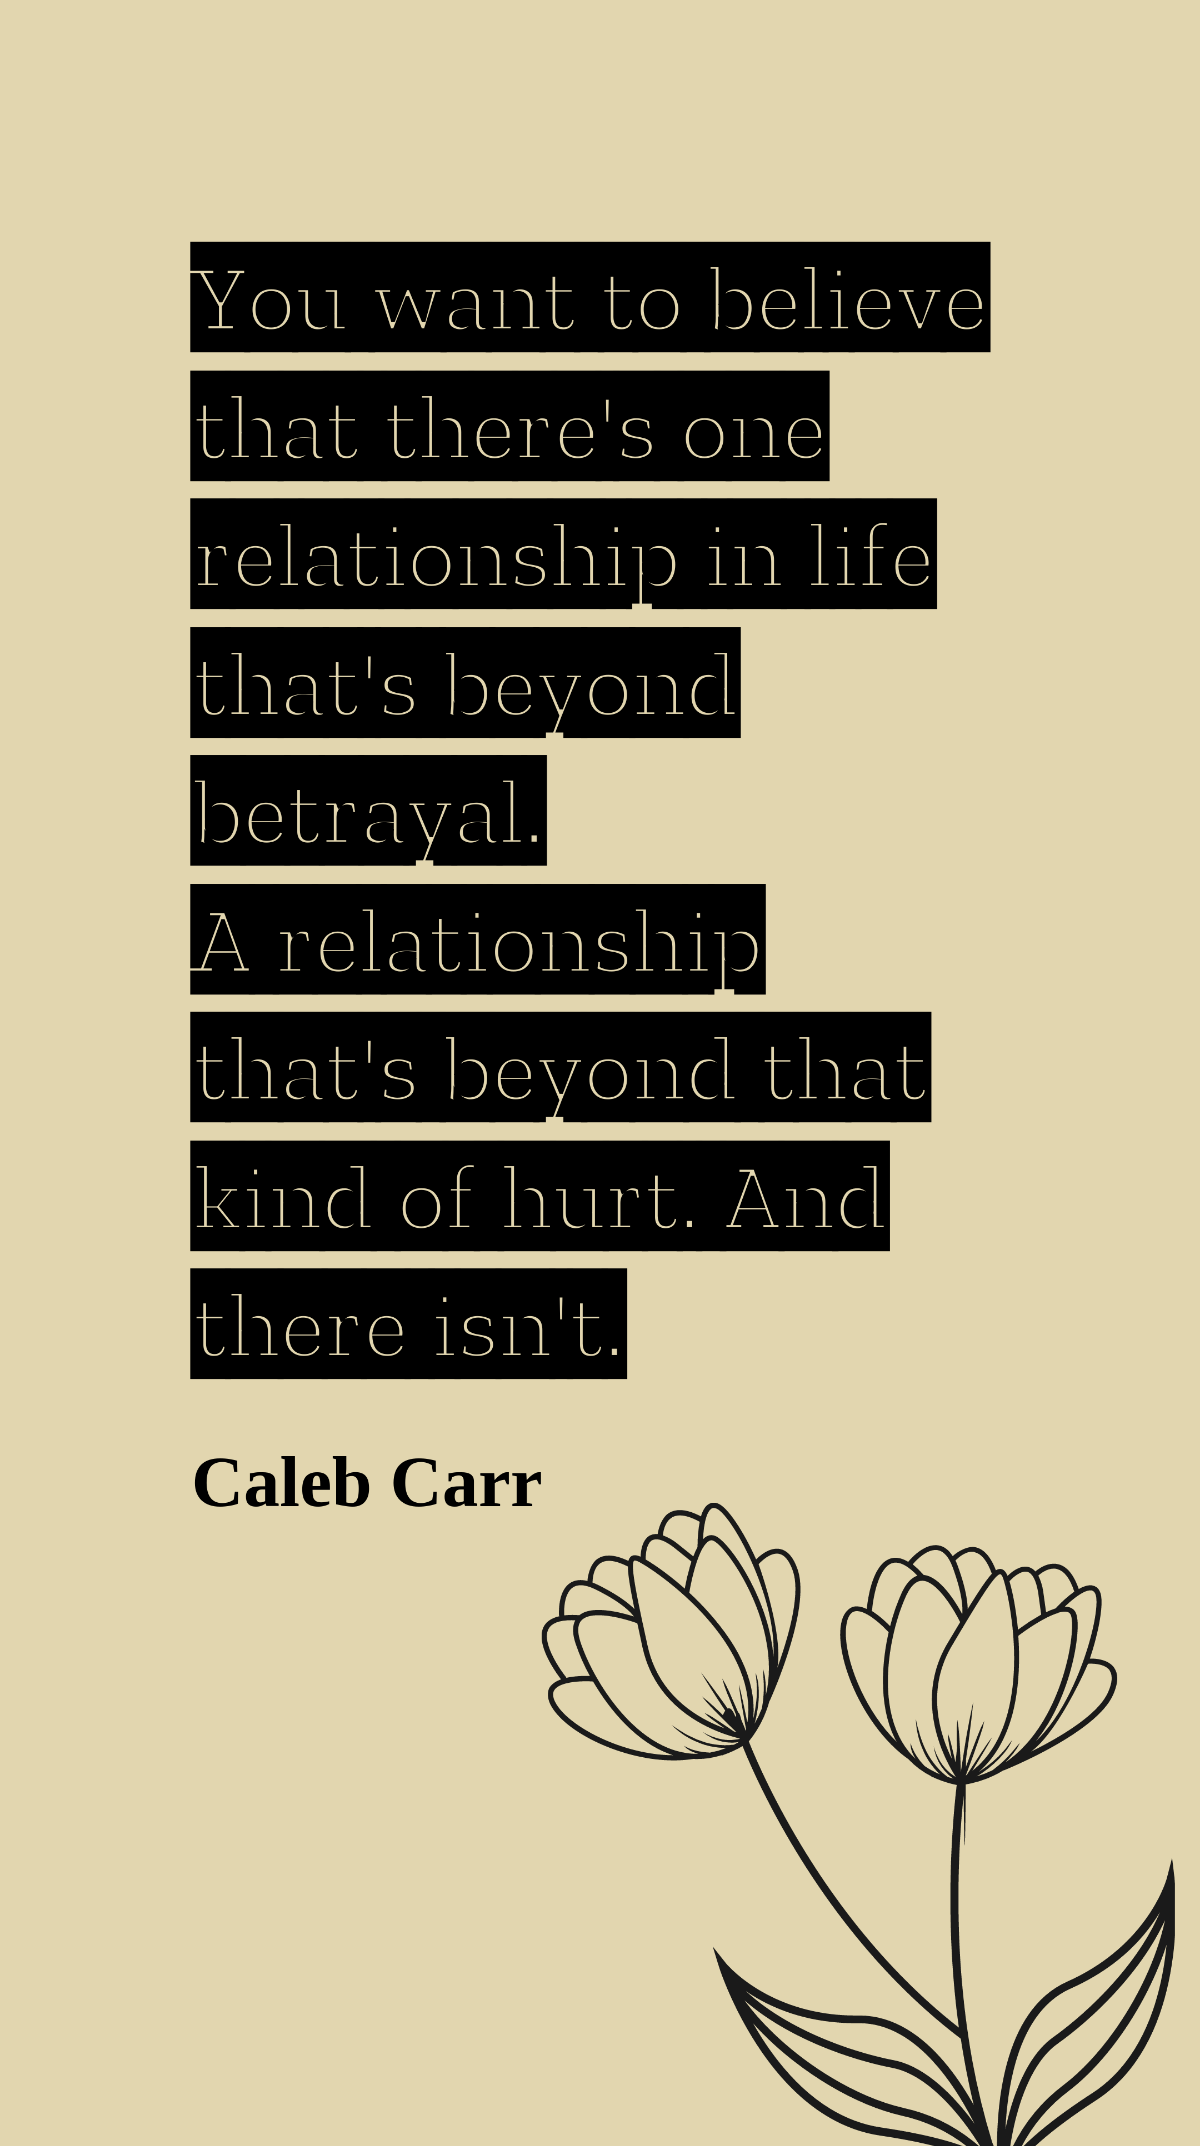 Caleb Carr - You want to believe that there's one relationship in life that's beyond betrayal. A relationship that's beyond that kind of hurt. And there isn't. Template